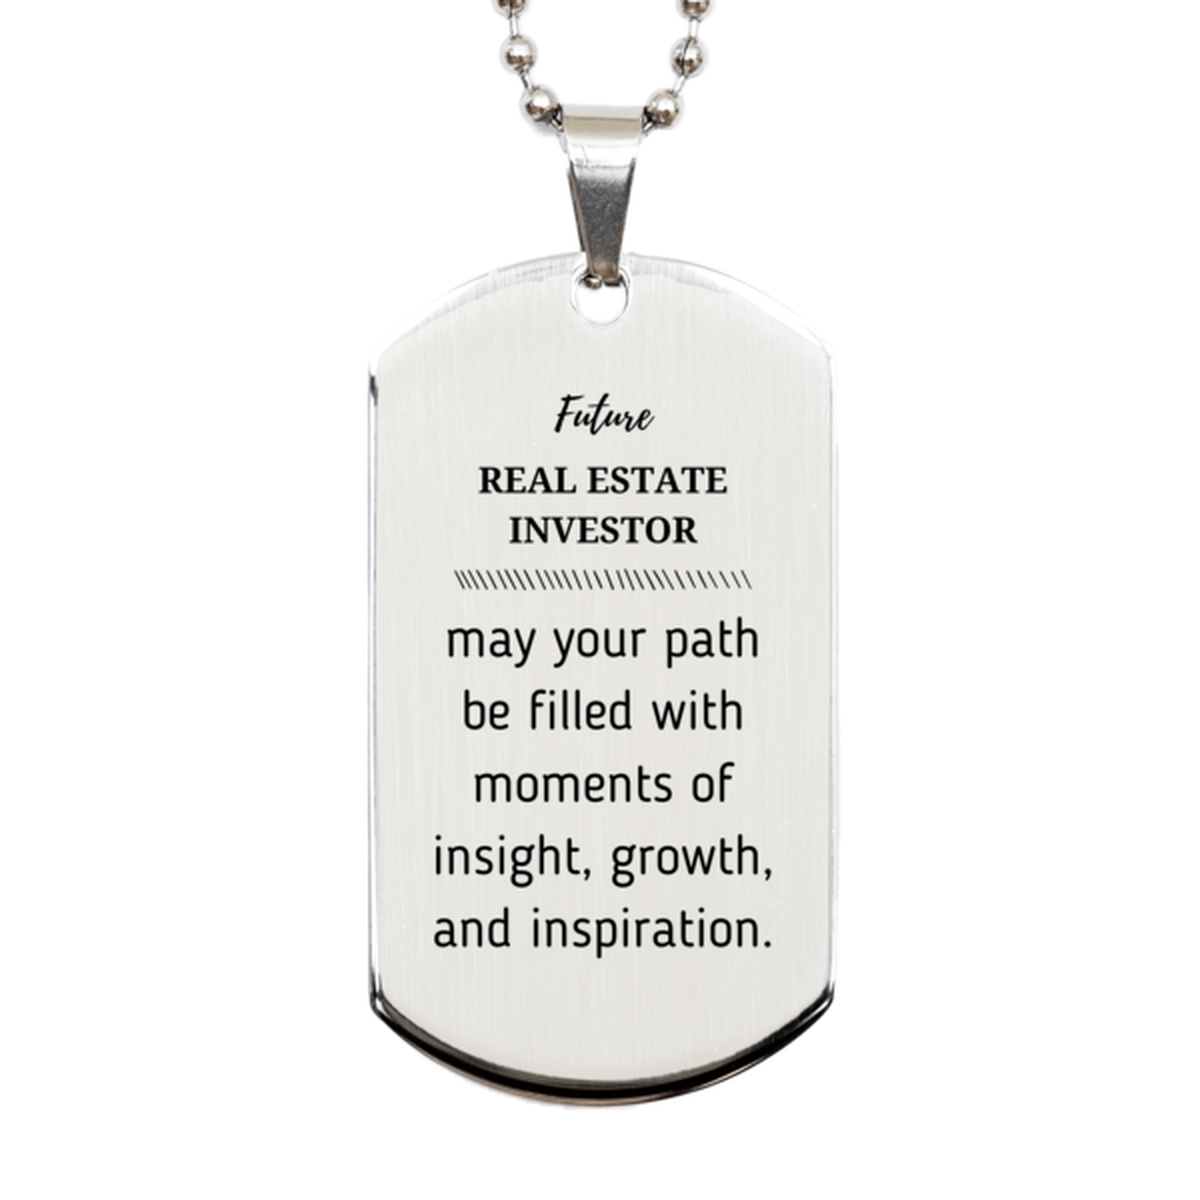 Future Real Estate Investor Gifts, May your path be filled with moments of insight, Graduation Gifts for New Real Estate Investor, Christmas Unique Silver Dog Tag For Men, Women, Friends